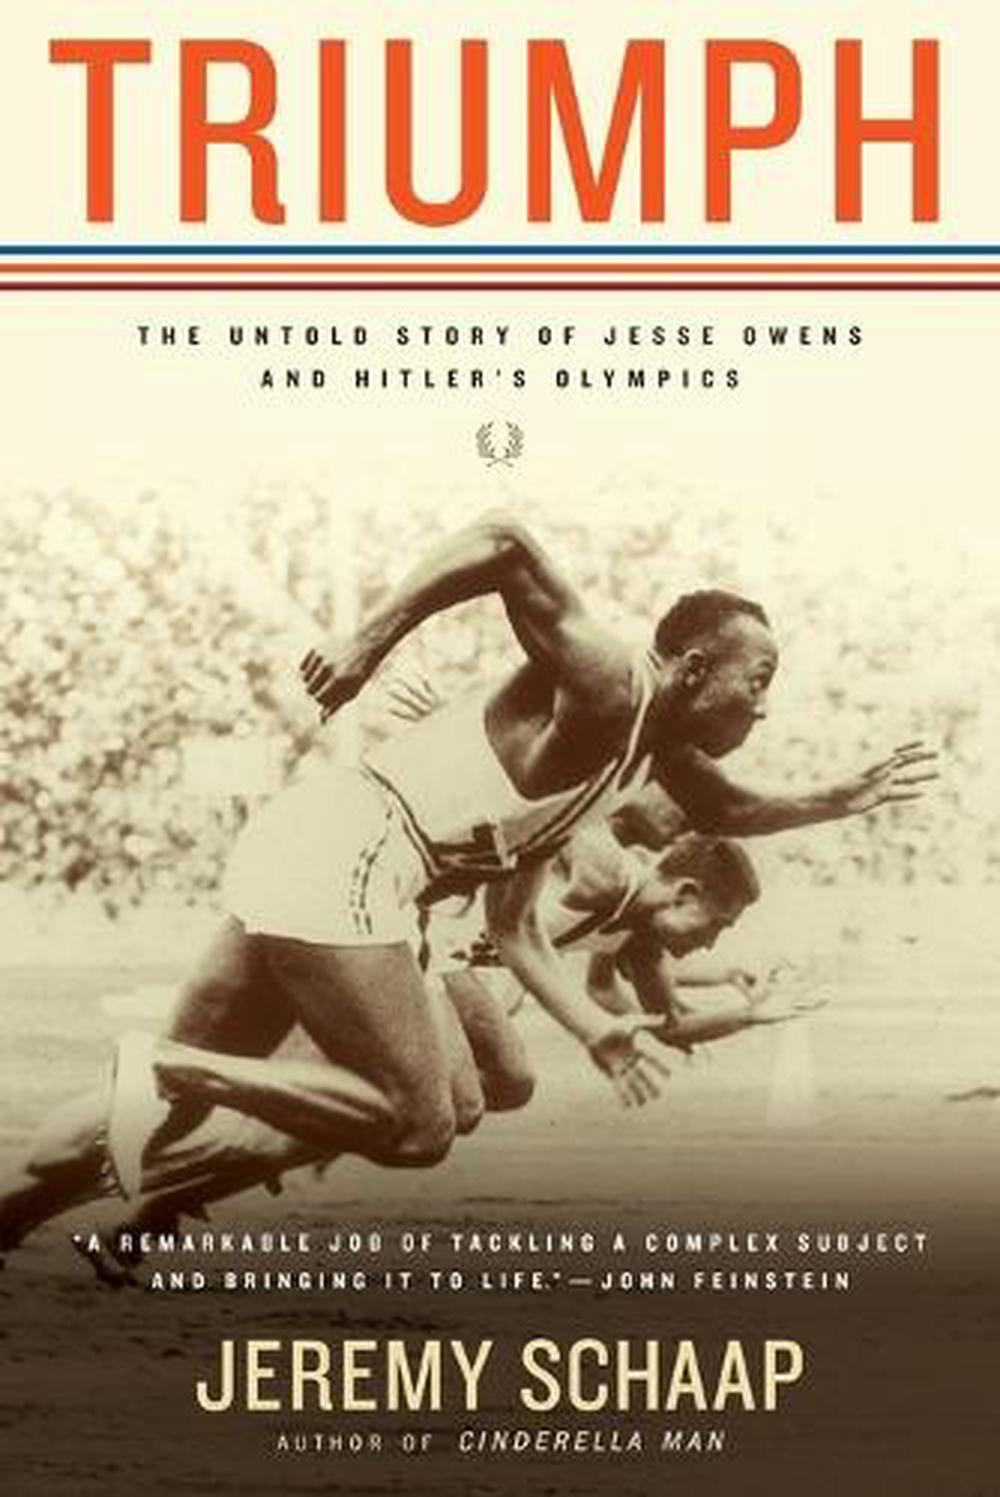 triumph the untold story of jesse owens and hitler